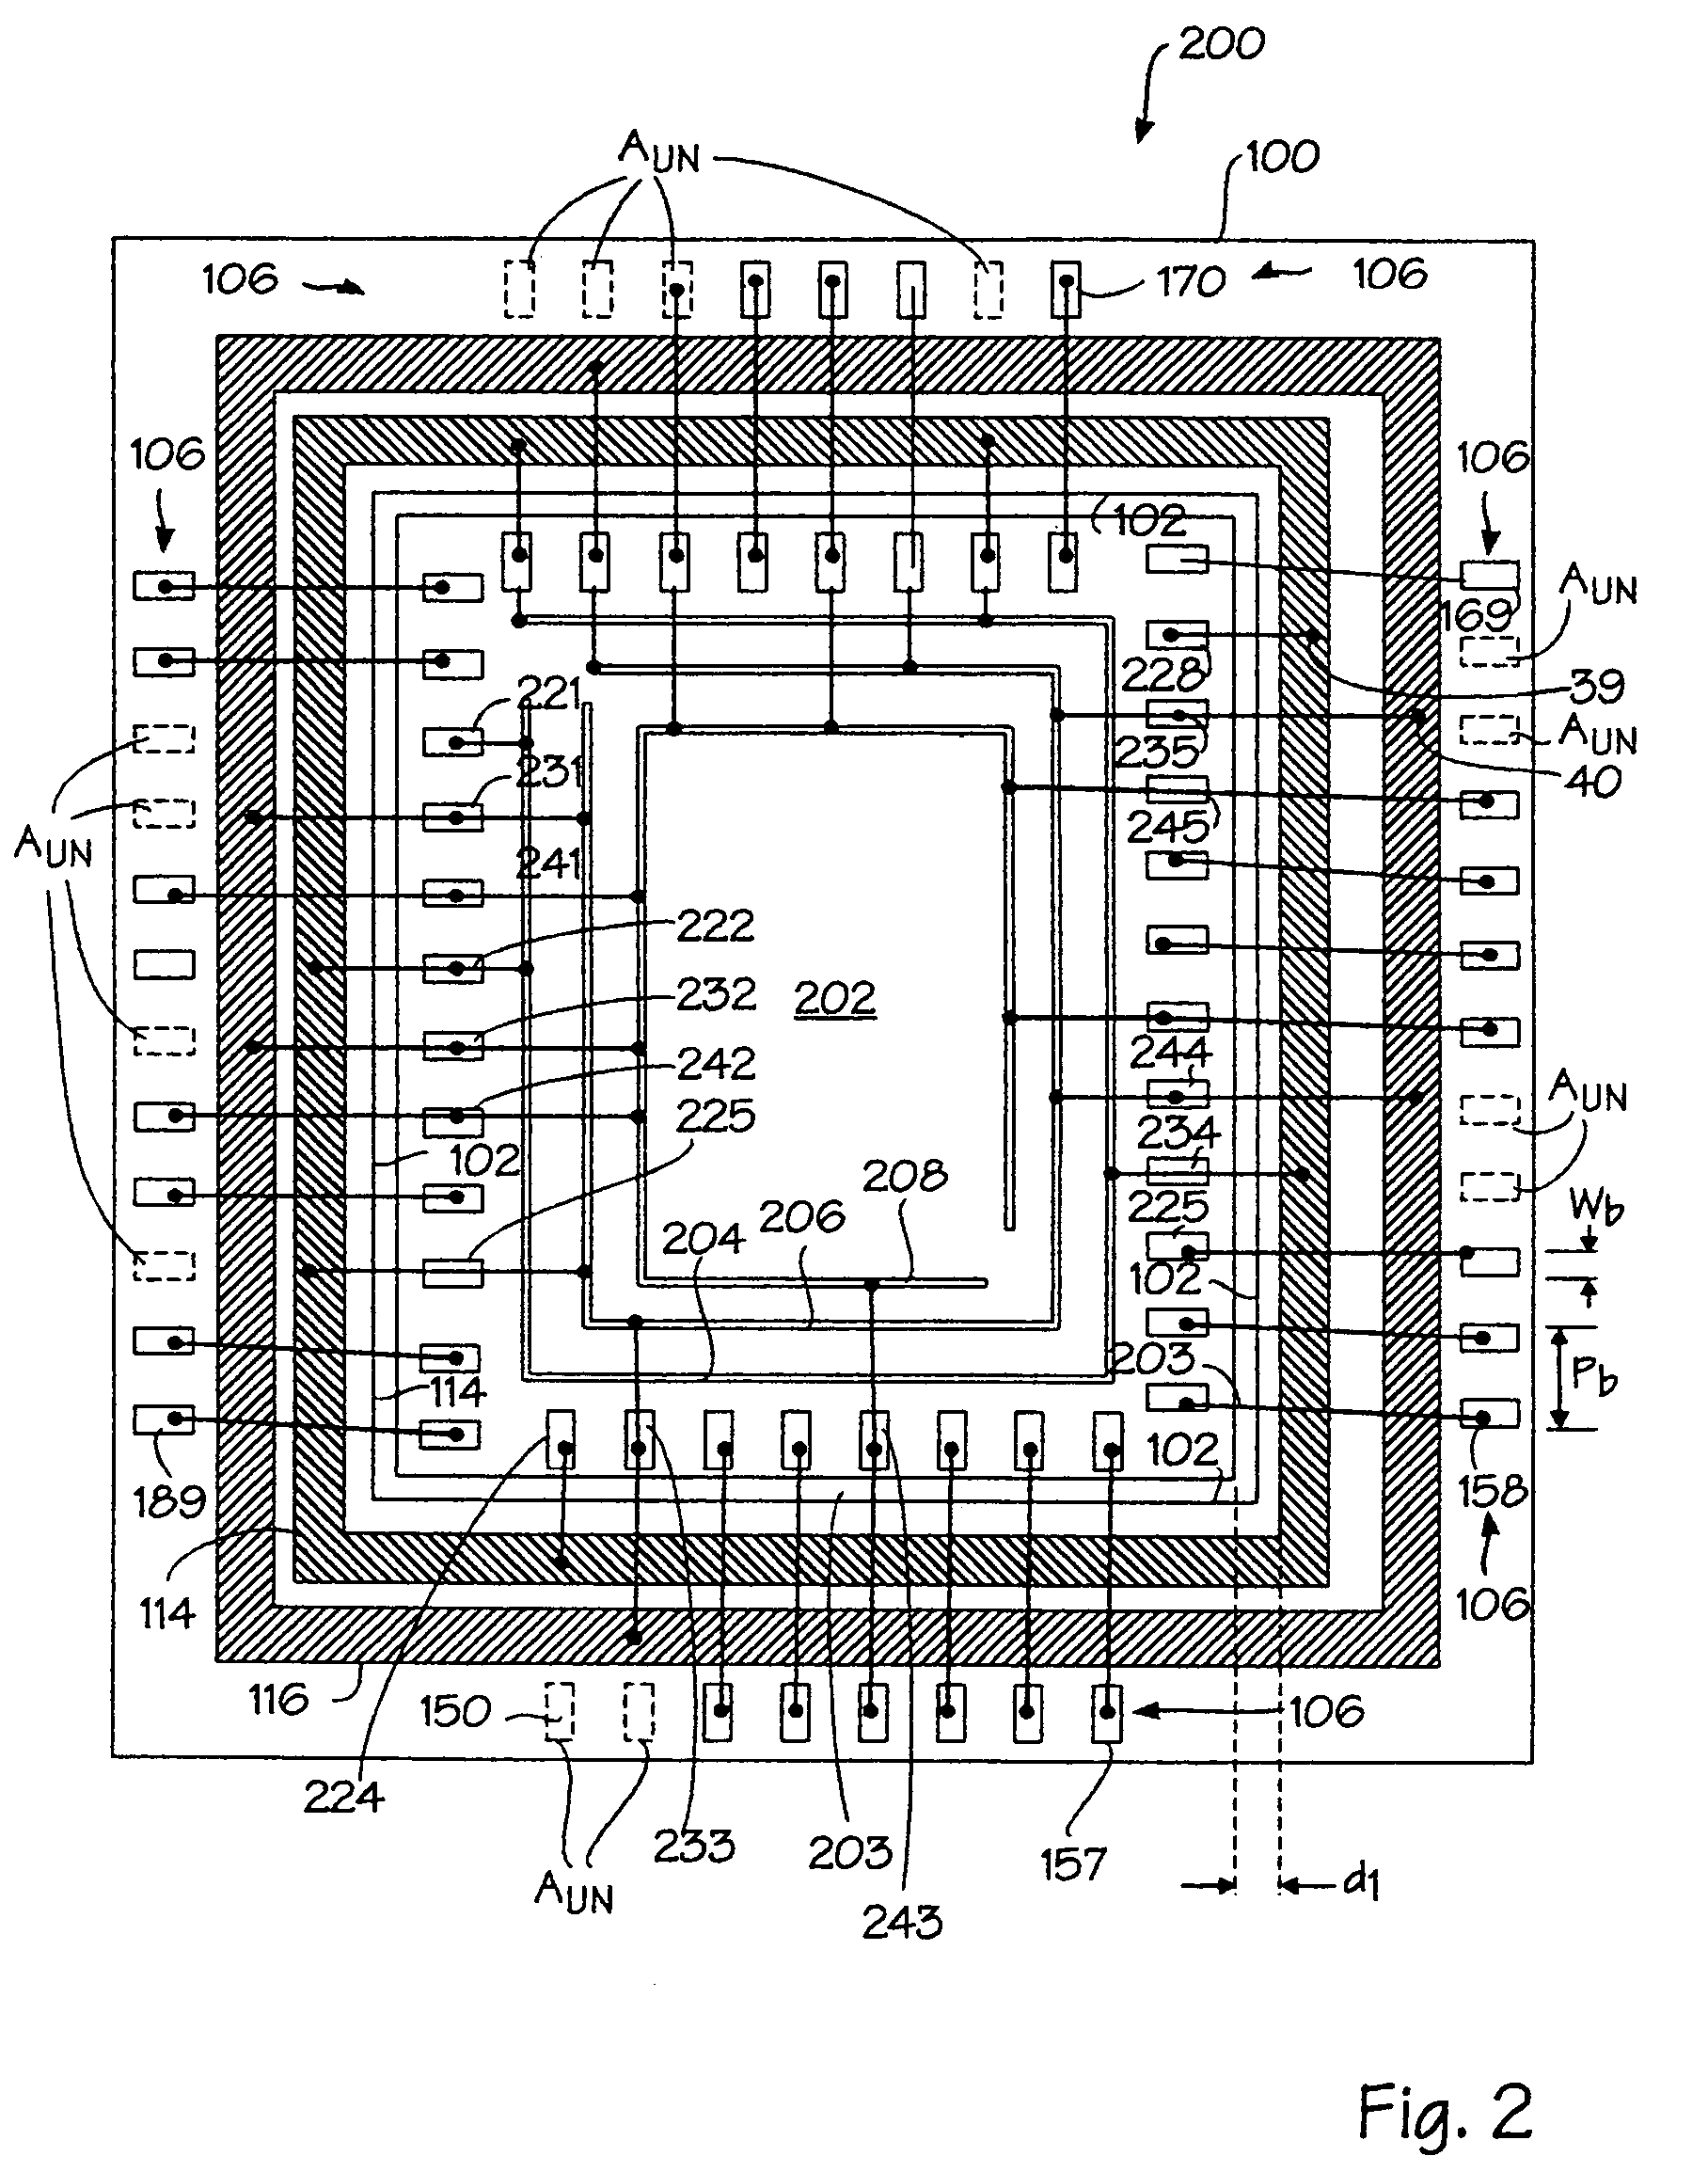 Multi-power ring chip scale package for system level integration